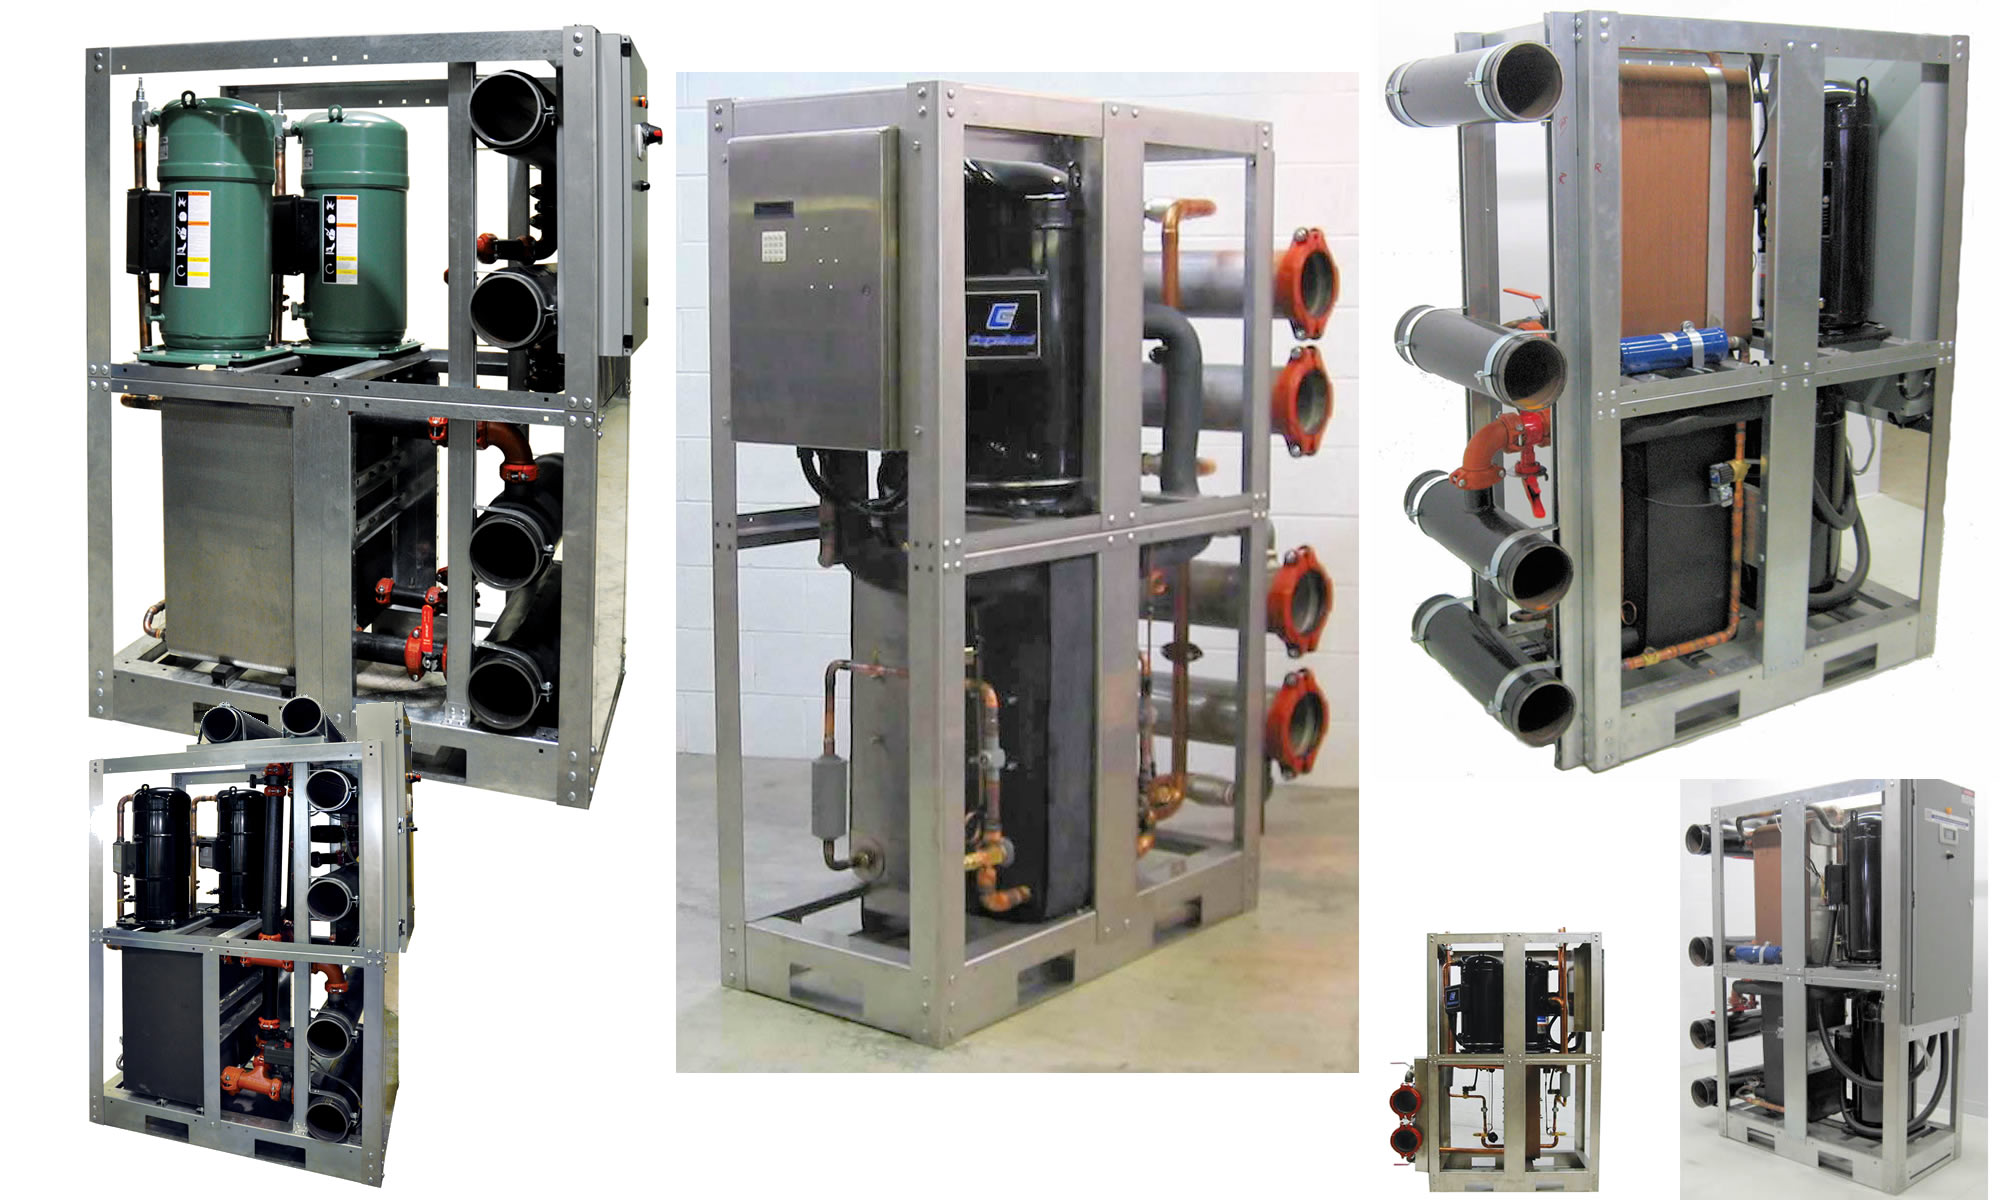 Water Cooled Central Chillers